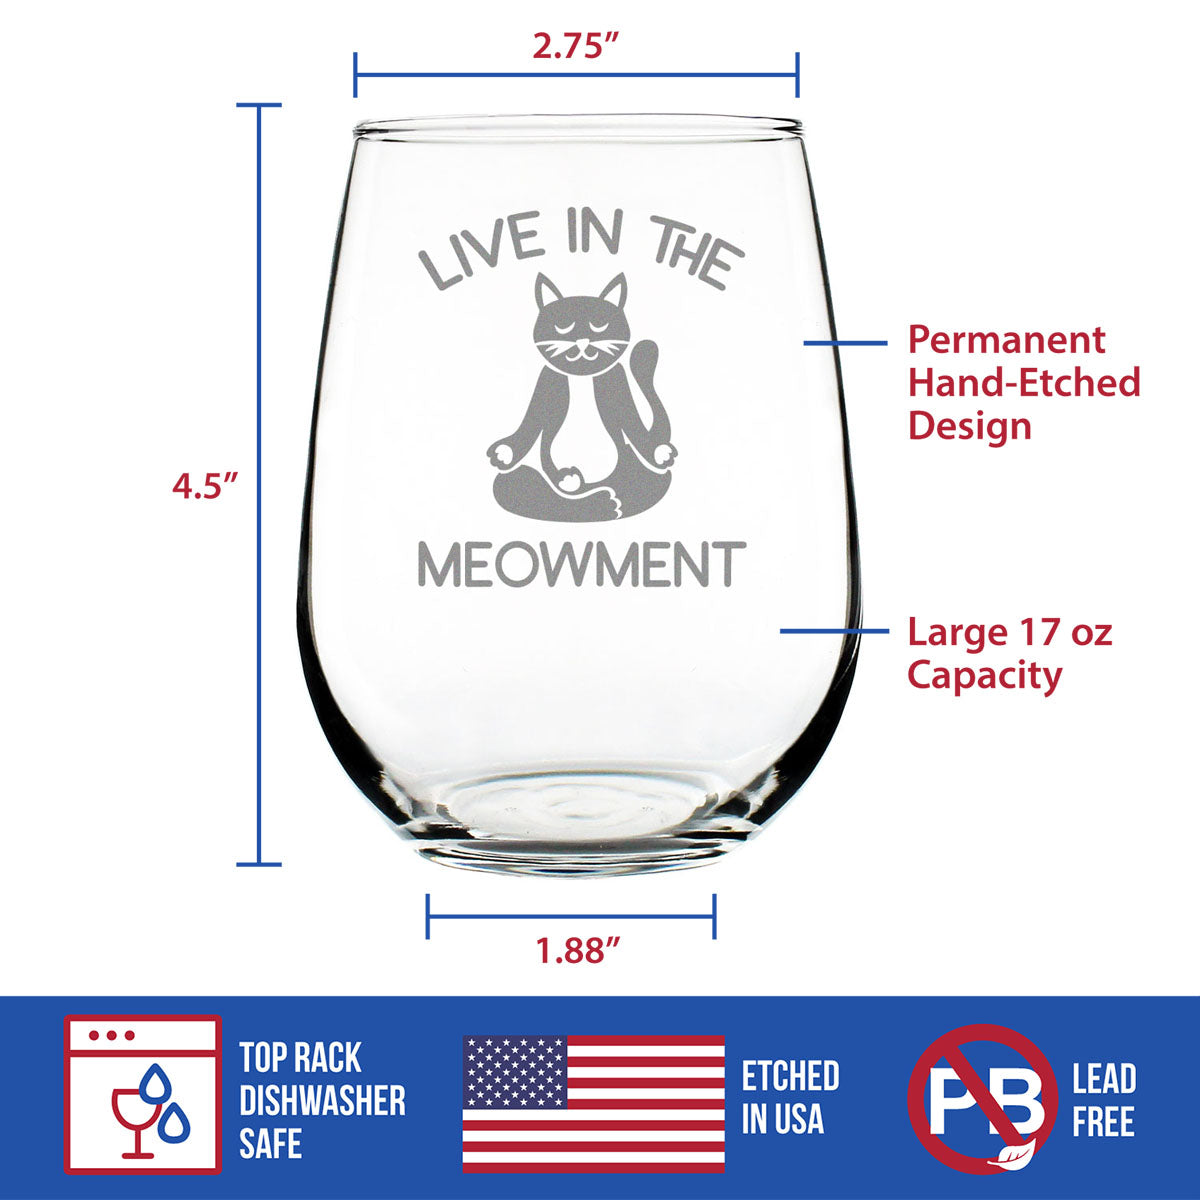 Live In The Meowment - Stemless Wine Glass - Funny Cat Gifts and Meditation Themed Decor - Large 17 Oz Glasses